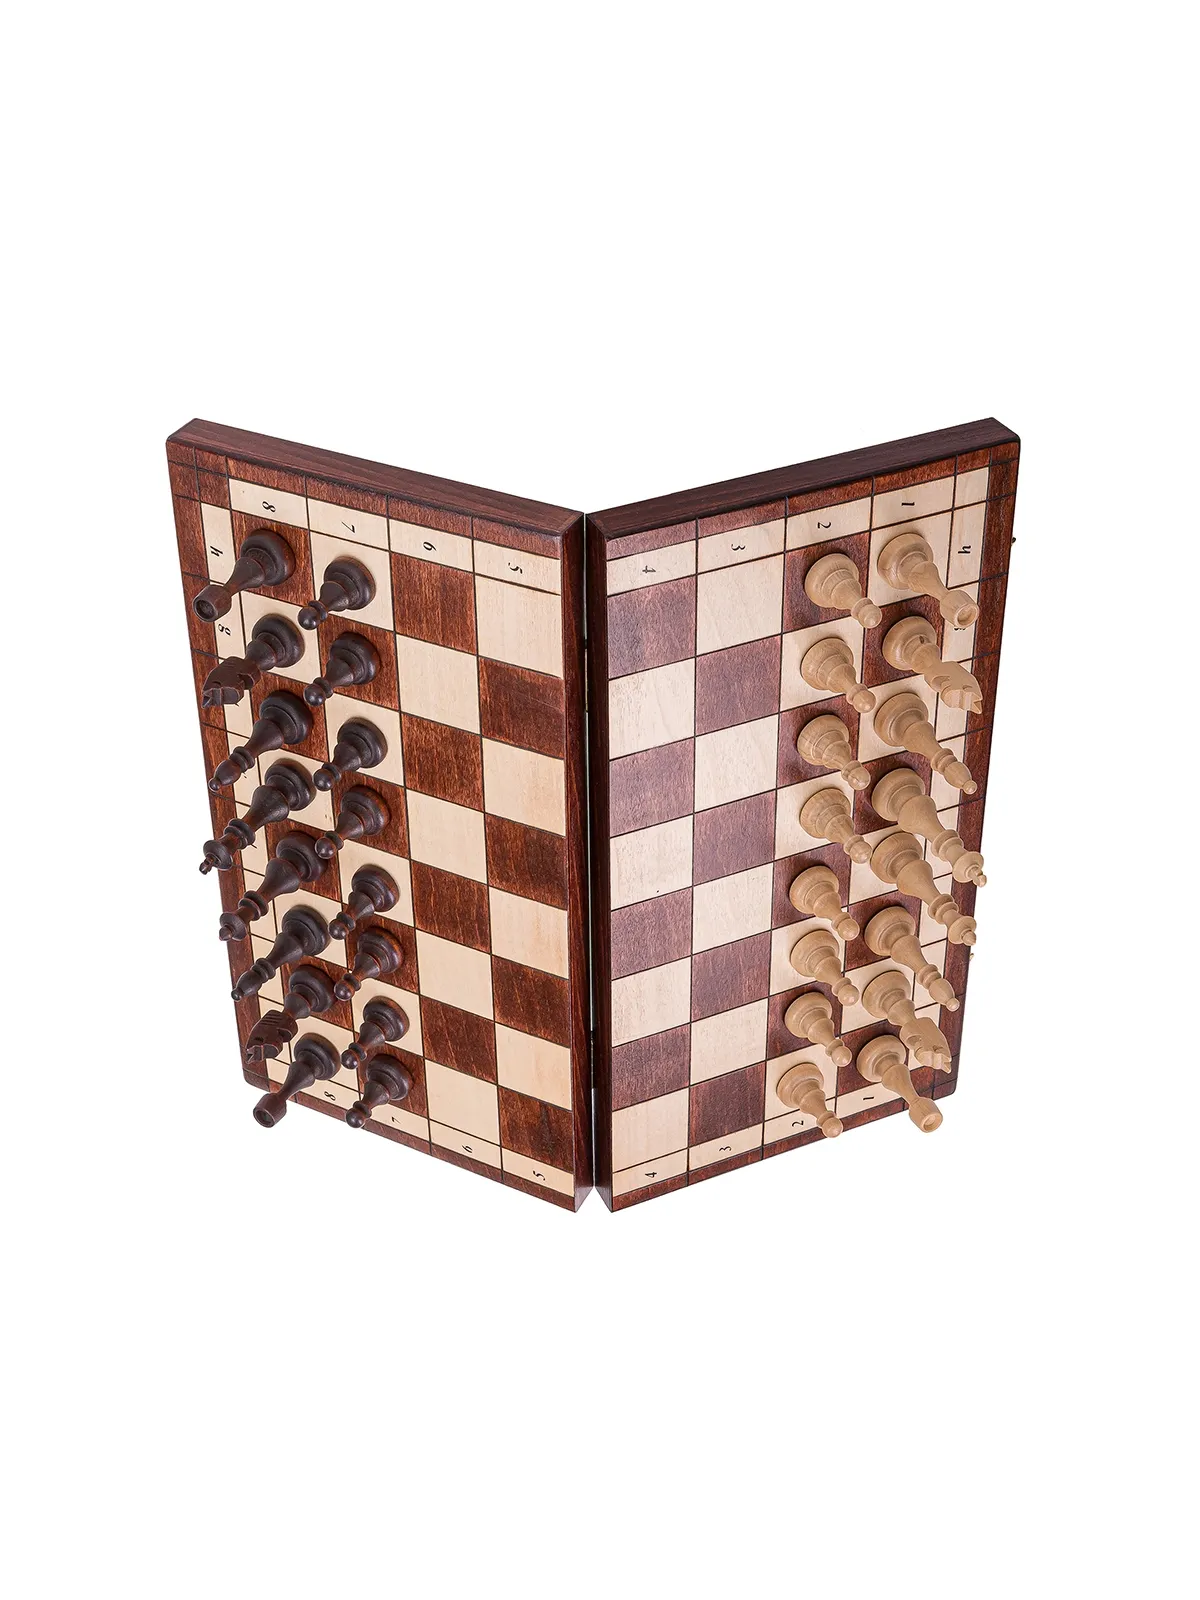 Chess Magnetic - 350